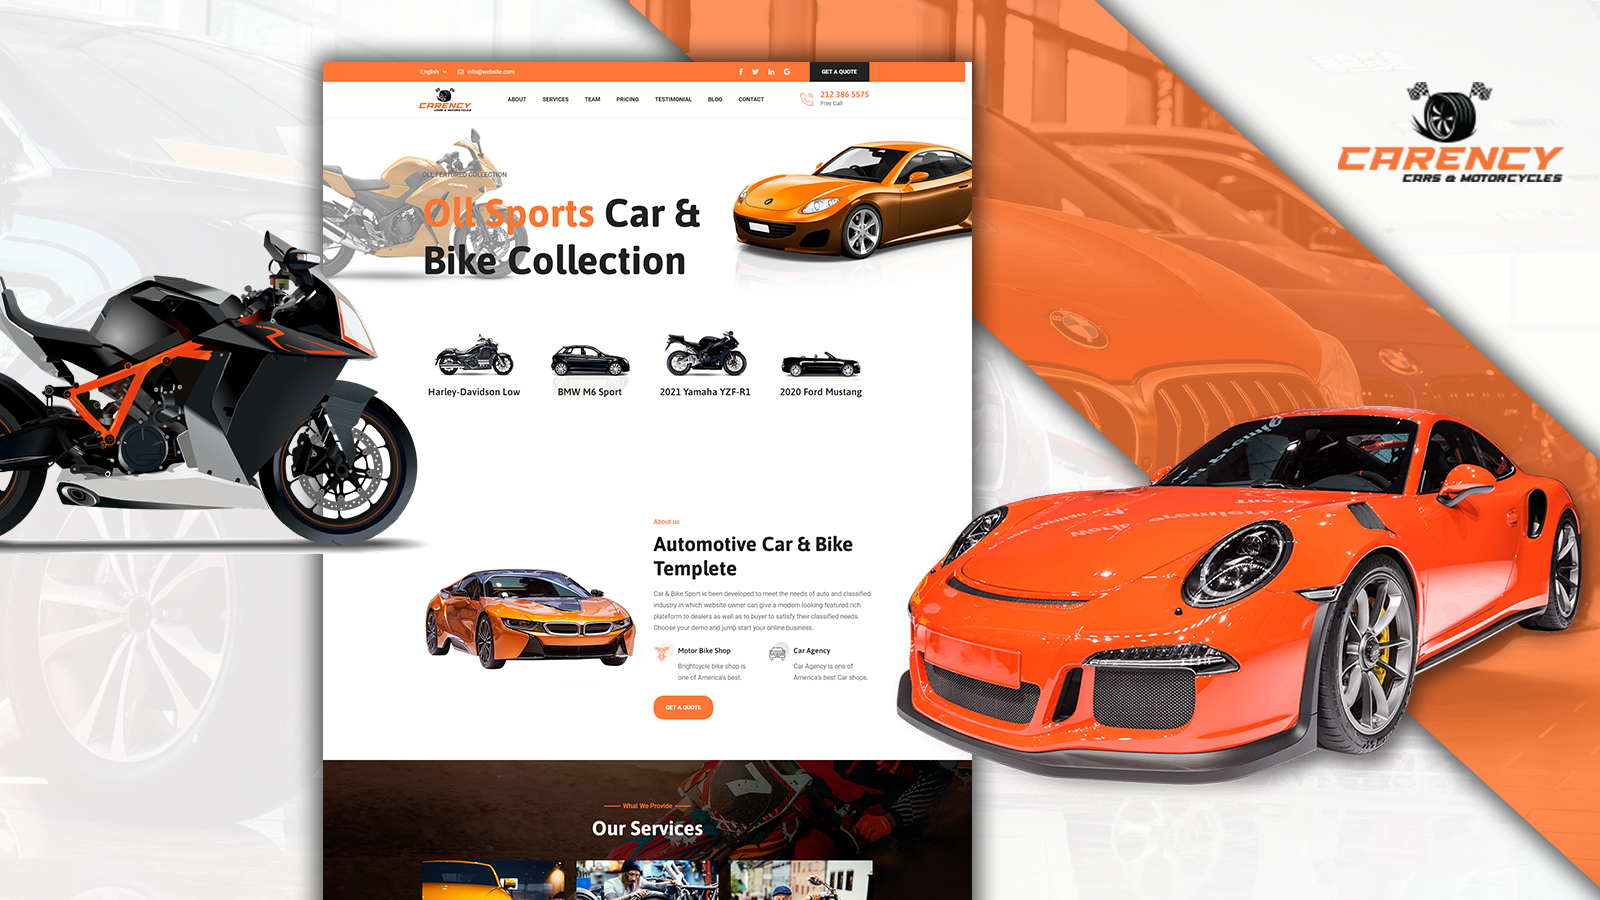 Carency Car Showroom Landing Page HTML5 Template